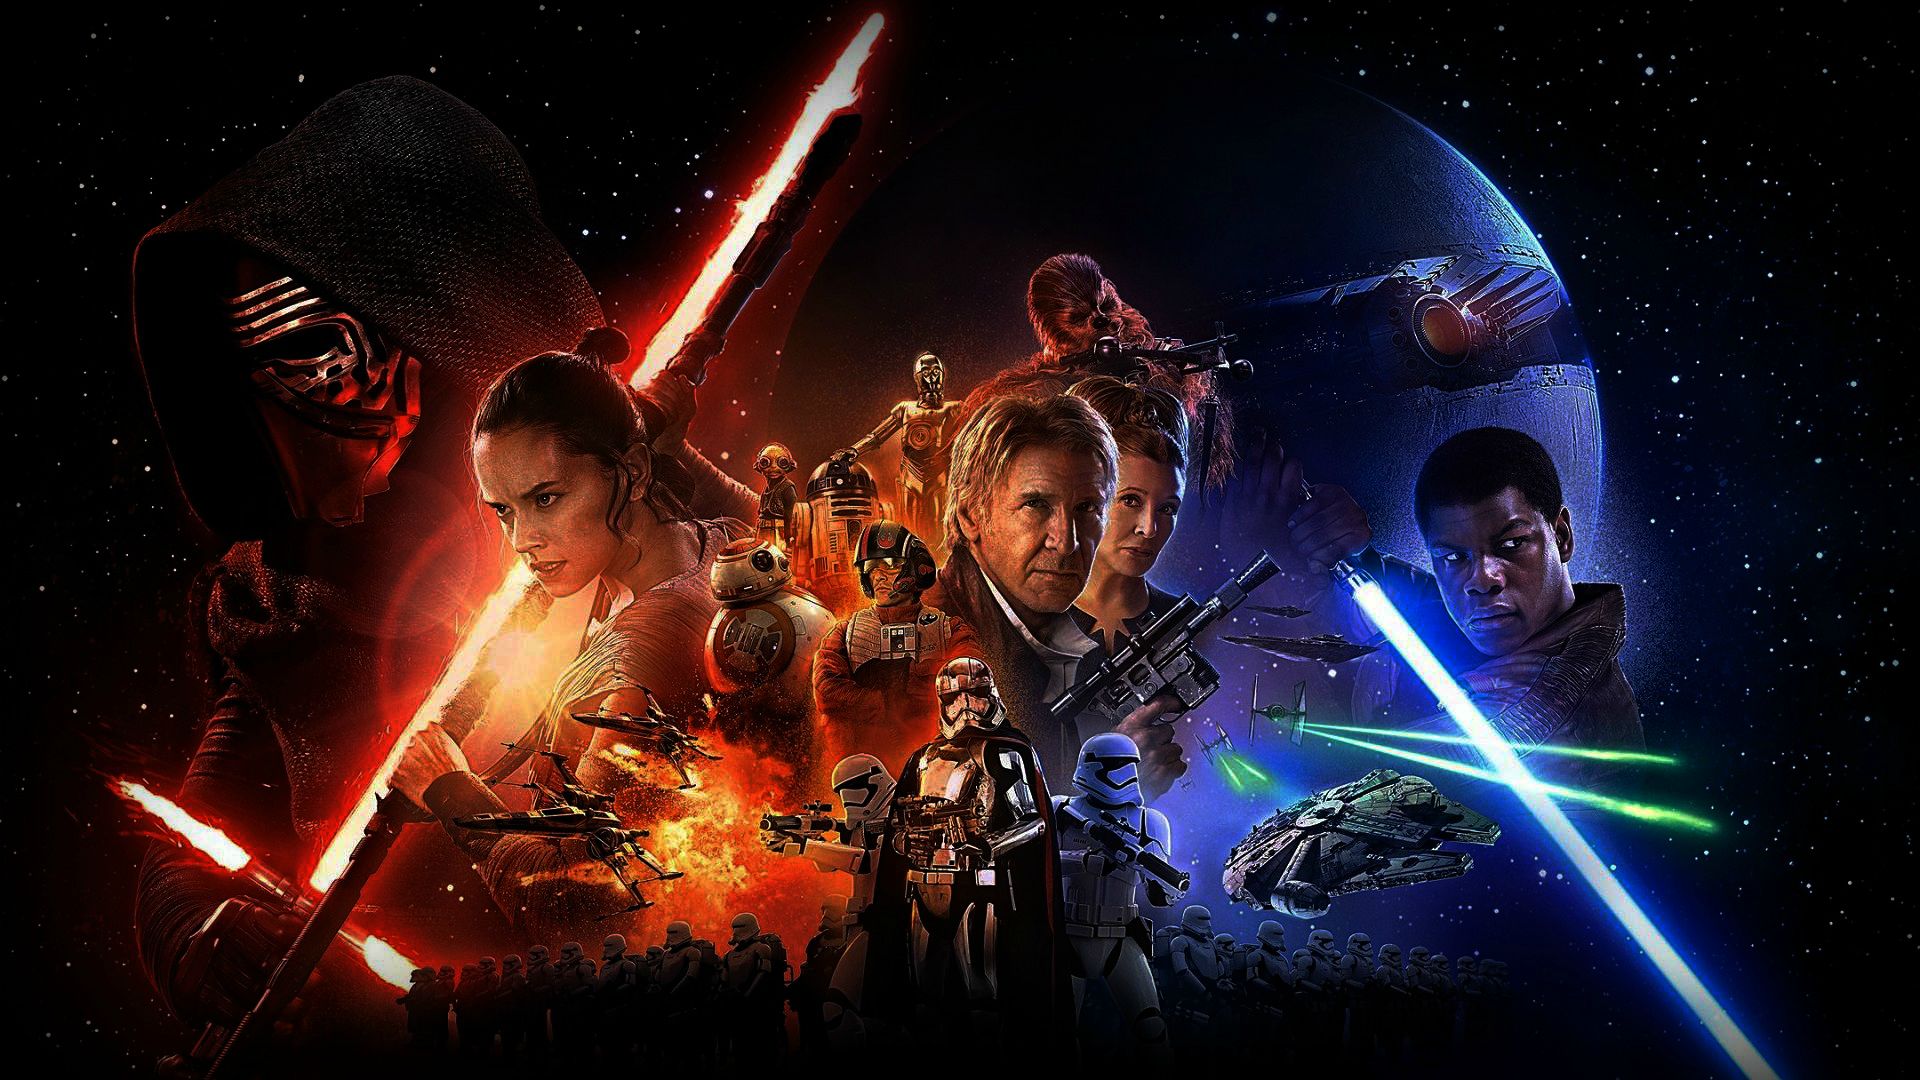 What do you think, is the Force Awakens just a clone of Star Wars IV or actually a new and inspiring movie?